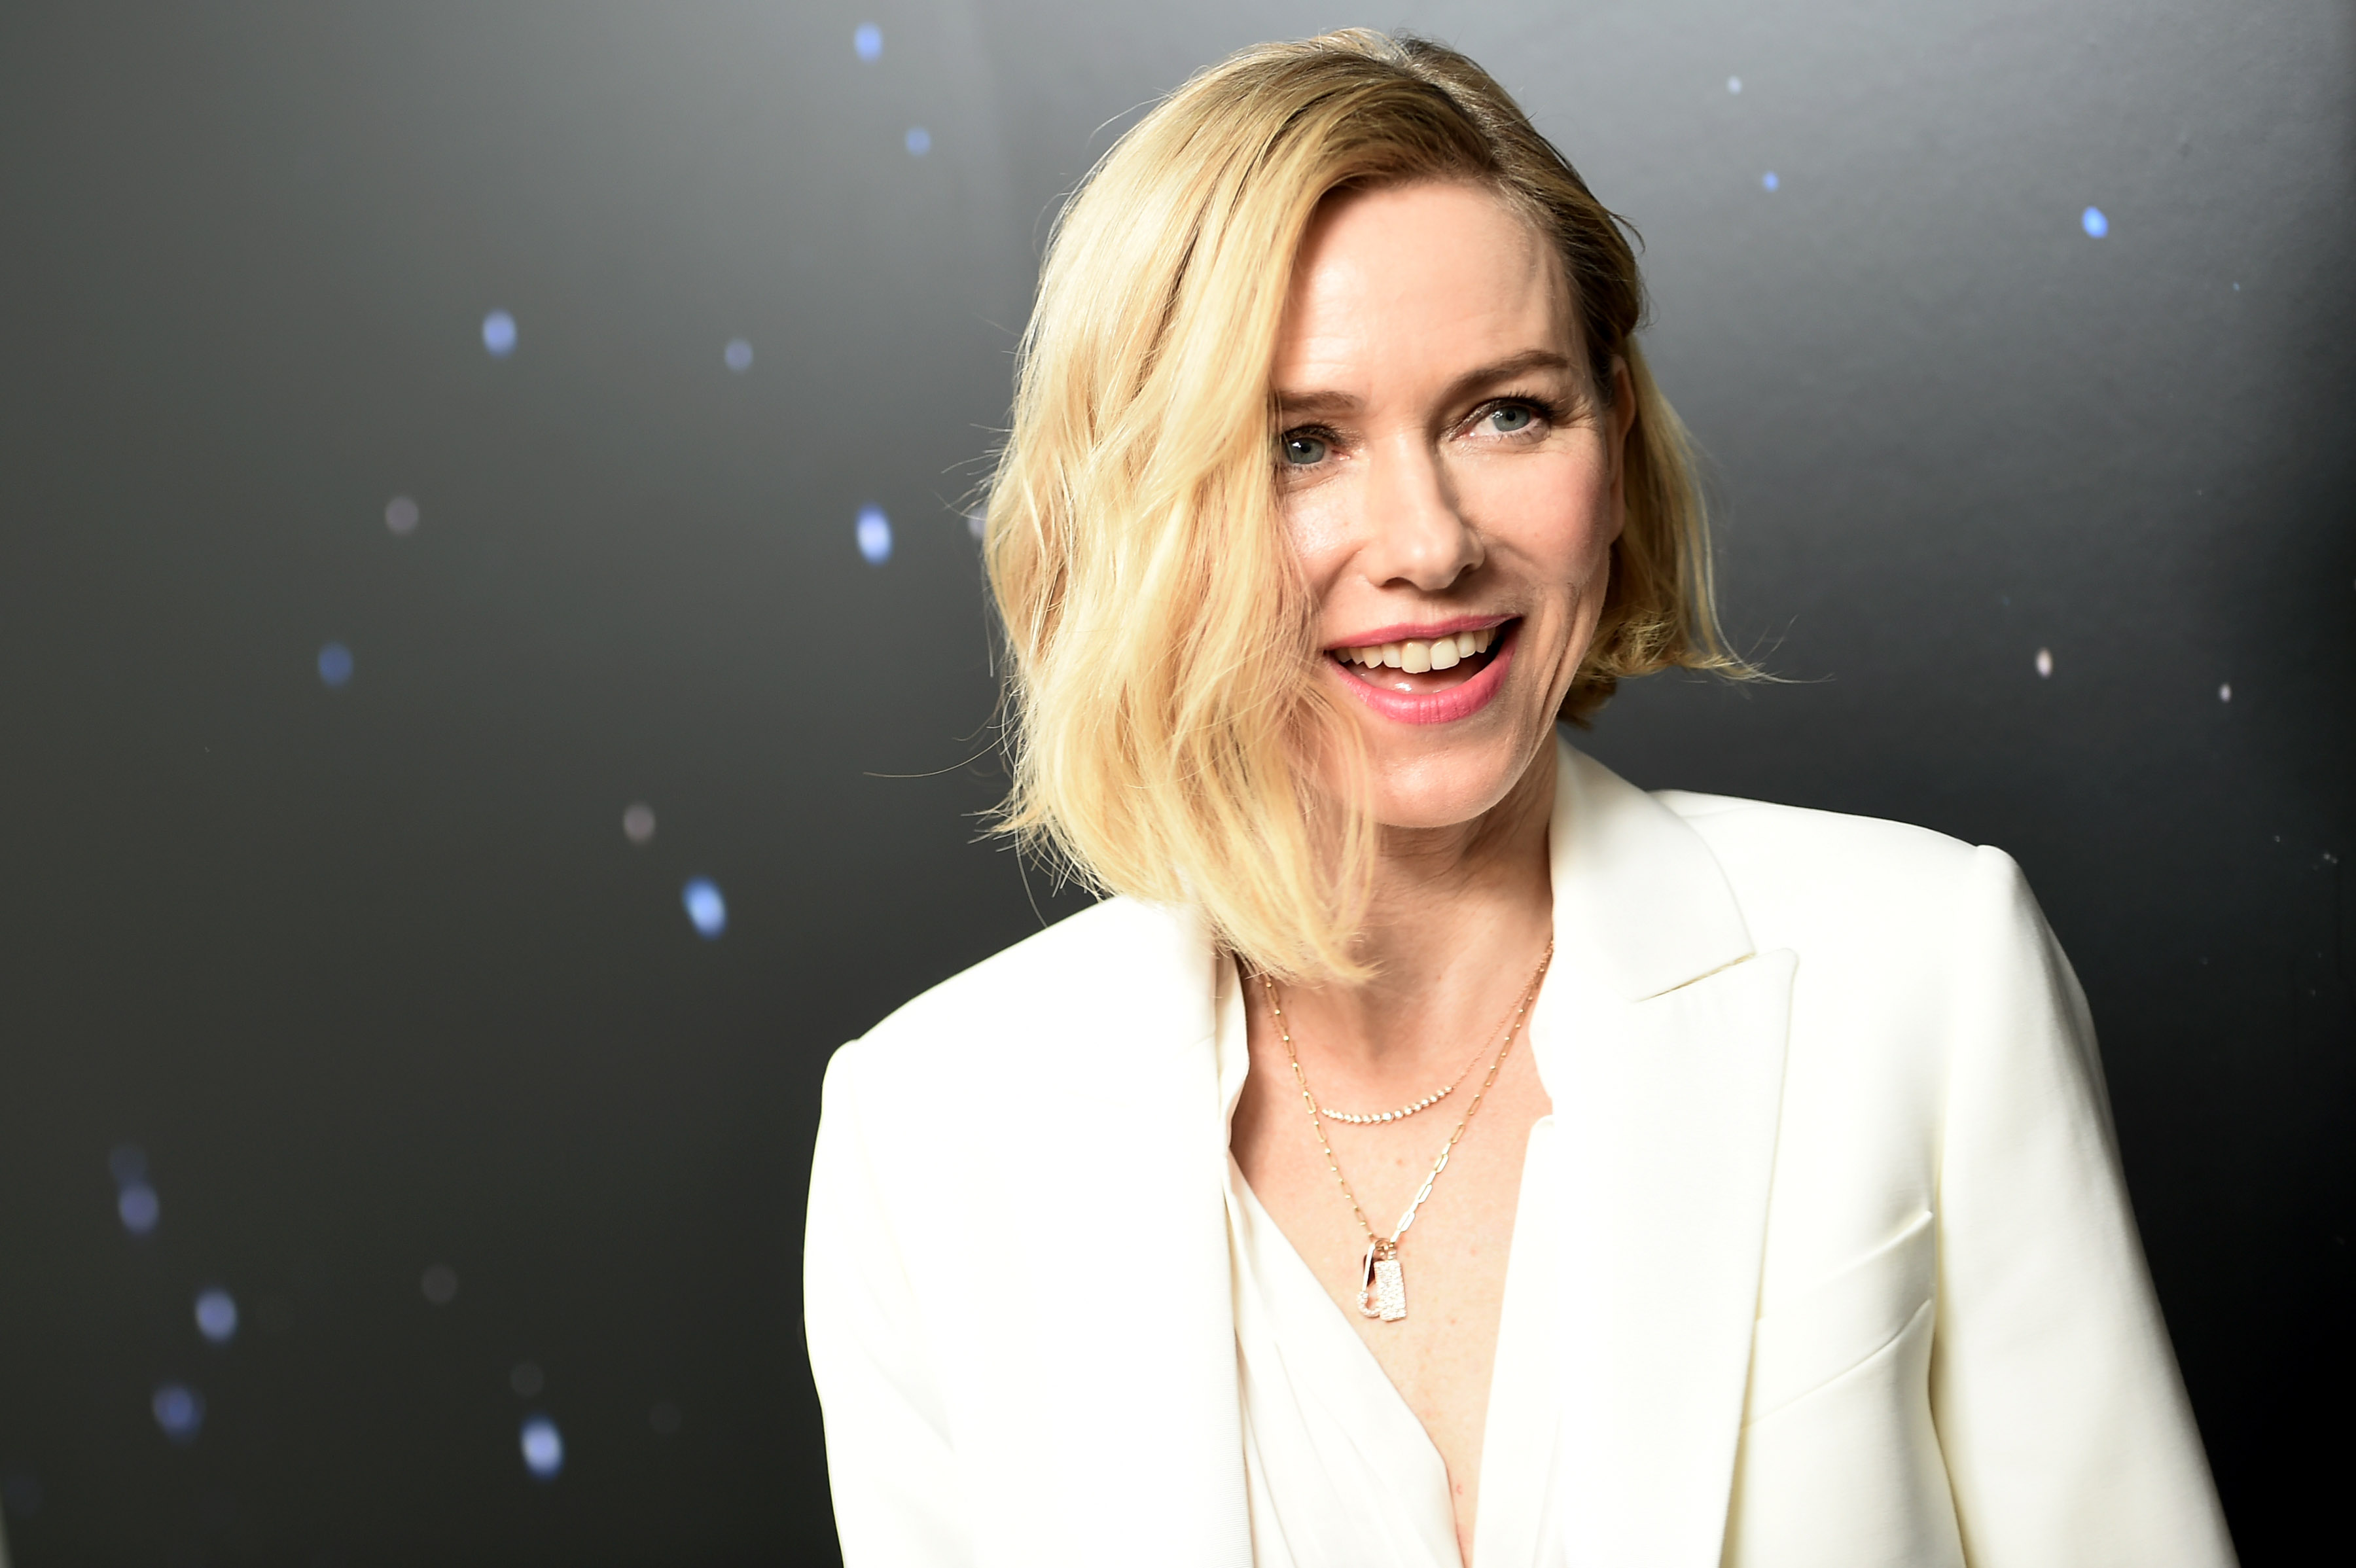 <p>Just as 2023 struck, Naomi Watts took to Instagram to declare she’s “coming in hot” for the new year. And we couldn’t agree more. The actress shared <a href="https://www.instagram.com/p/Cm4J5wapzZH/">a video</a> of herself frolicking in a bikini looking totally joyful!</p>